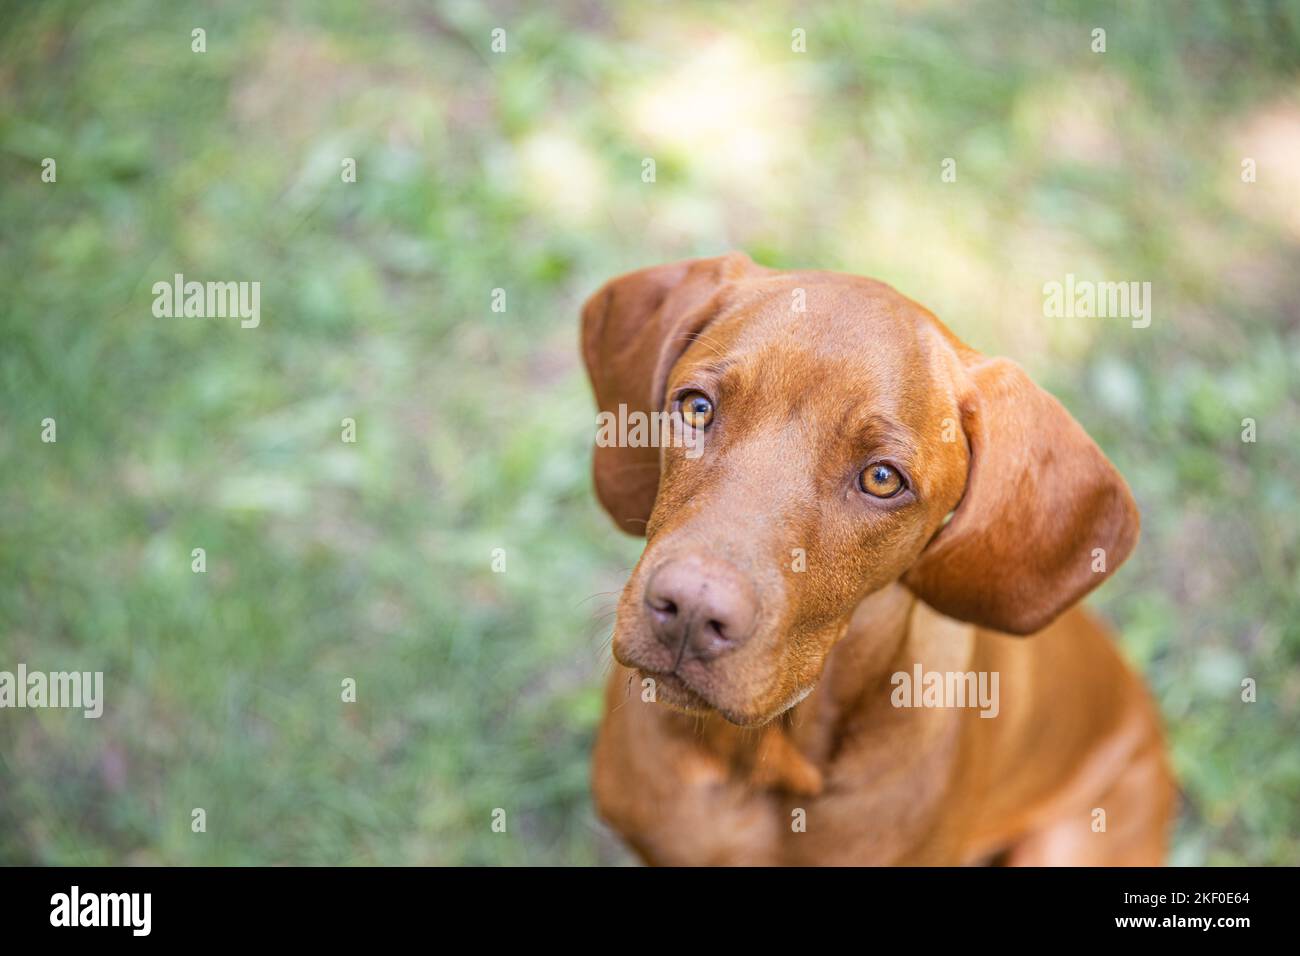 Beautiful Hungarian vizsla dog portrait. Vizsla hunting dog lying down in a garden and looking to the side. Dog background. Stock Photo